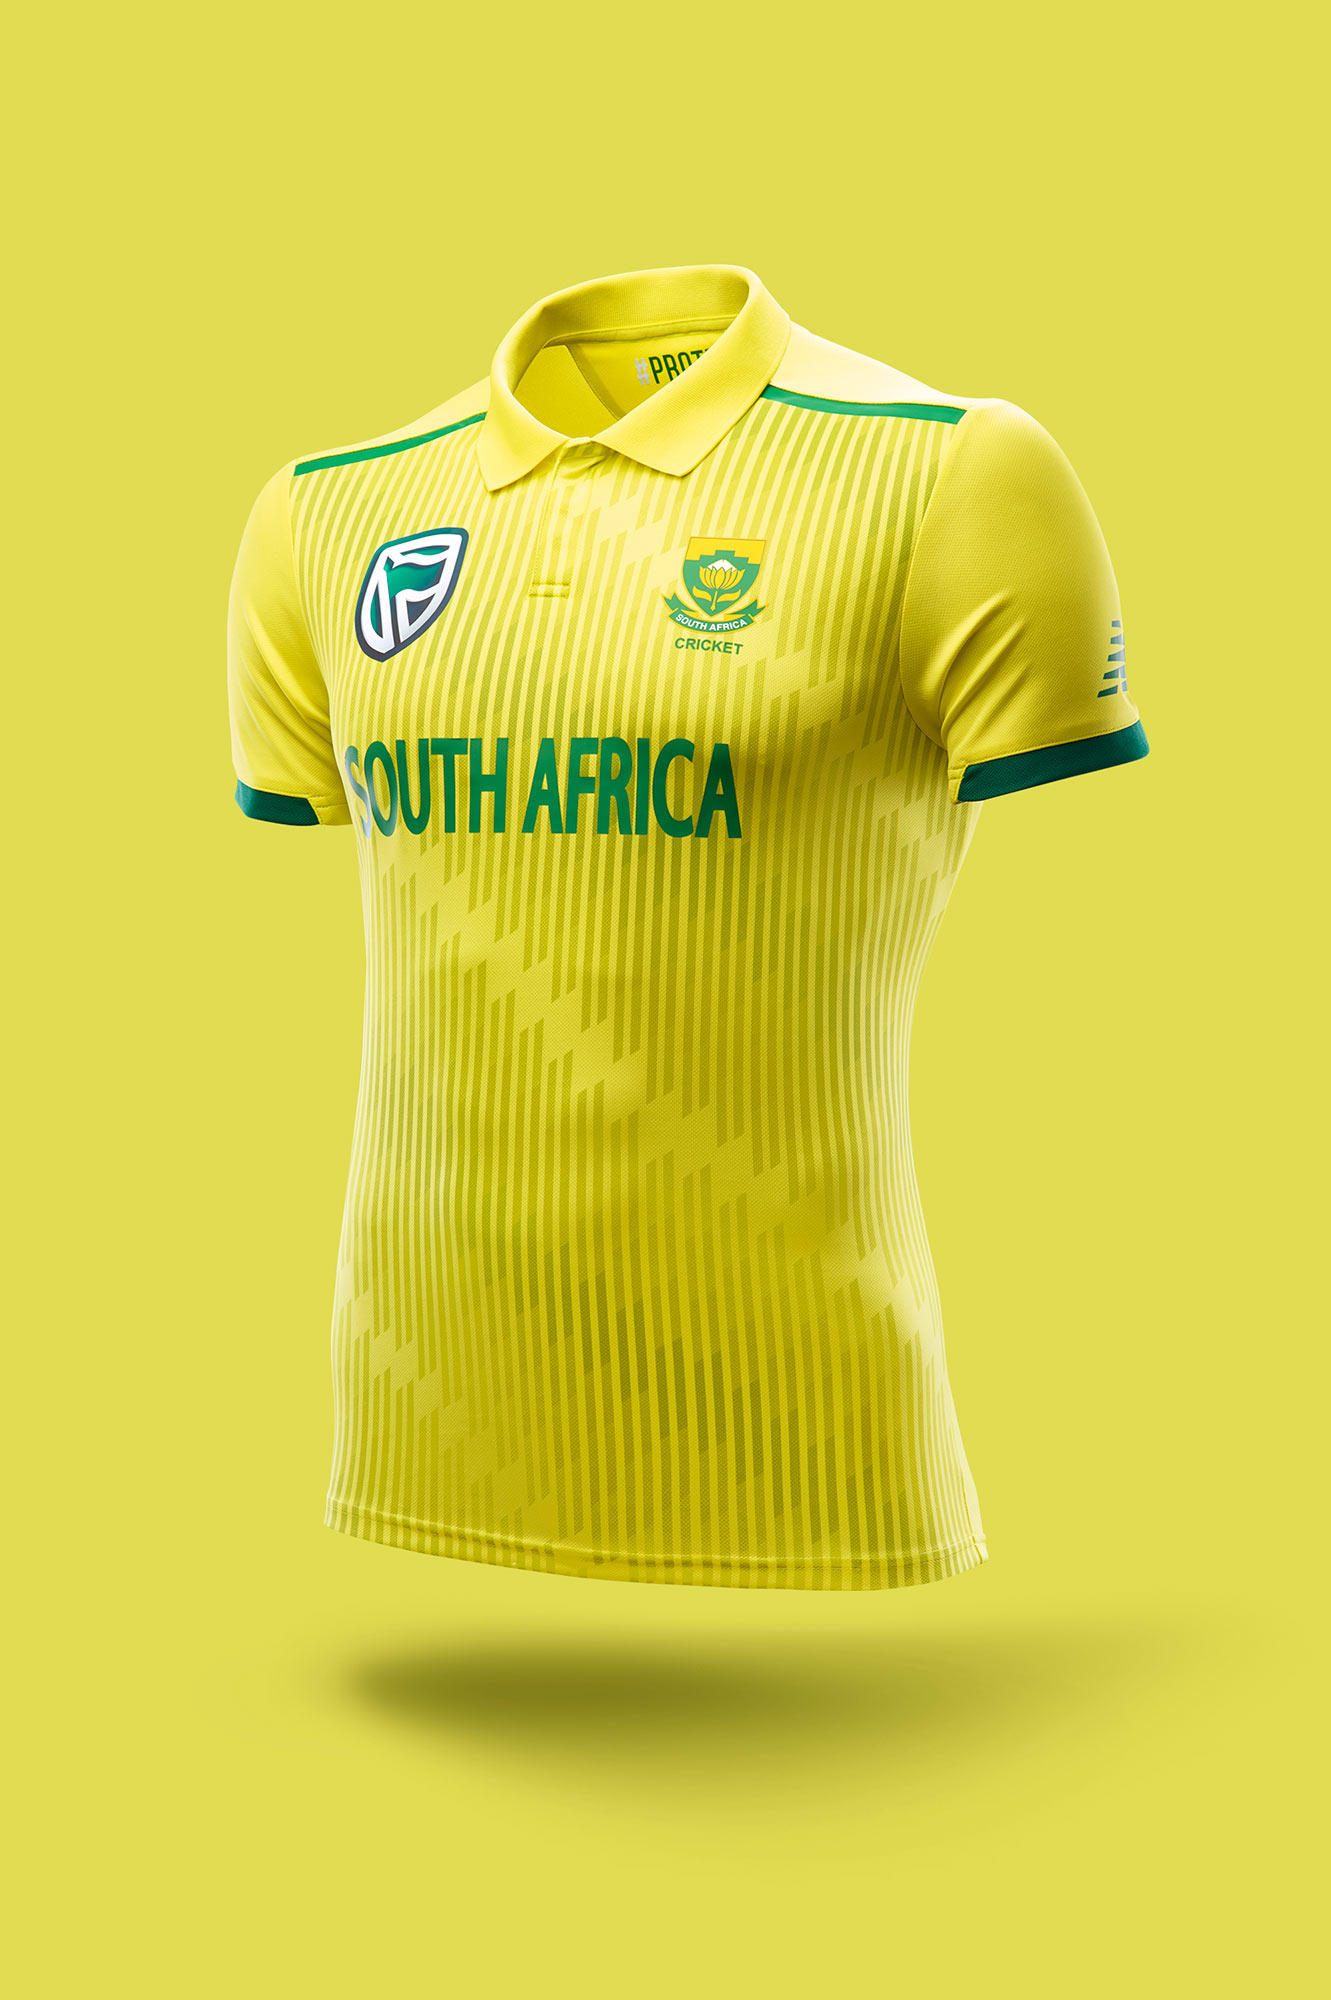 Present the stunning studio photography of the New Balance Replica South Africa's cricket Jersey.